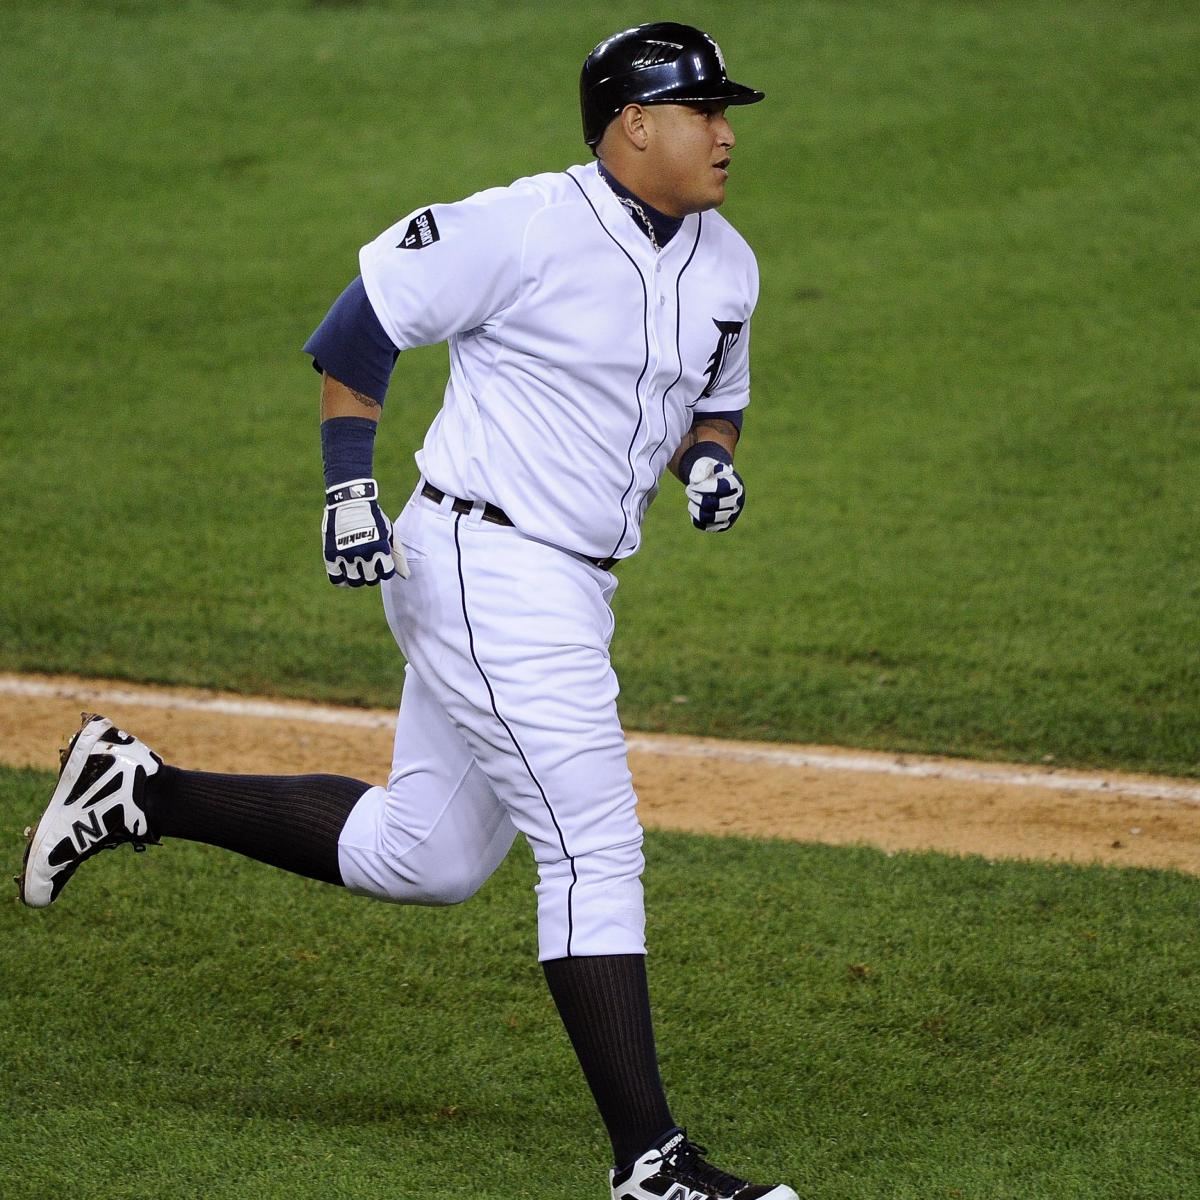 Prince Fielder: Miguel Cabrera is among 'greatest of all time